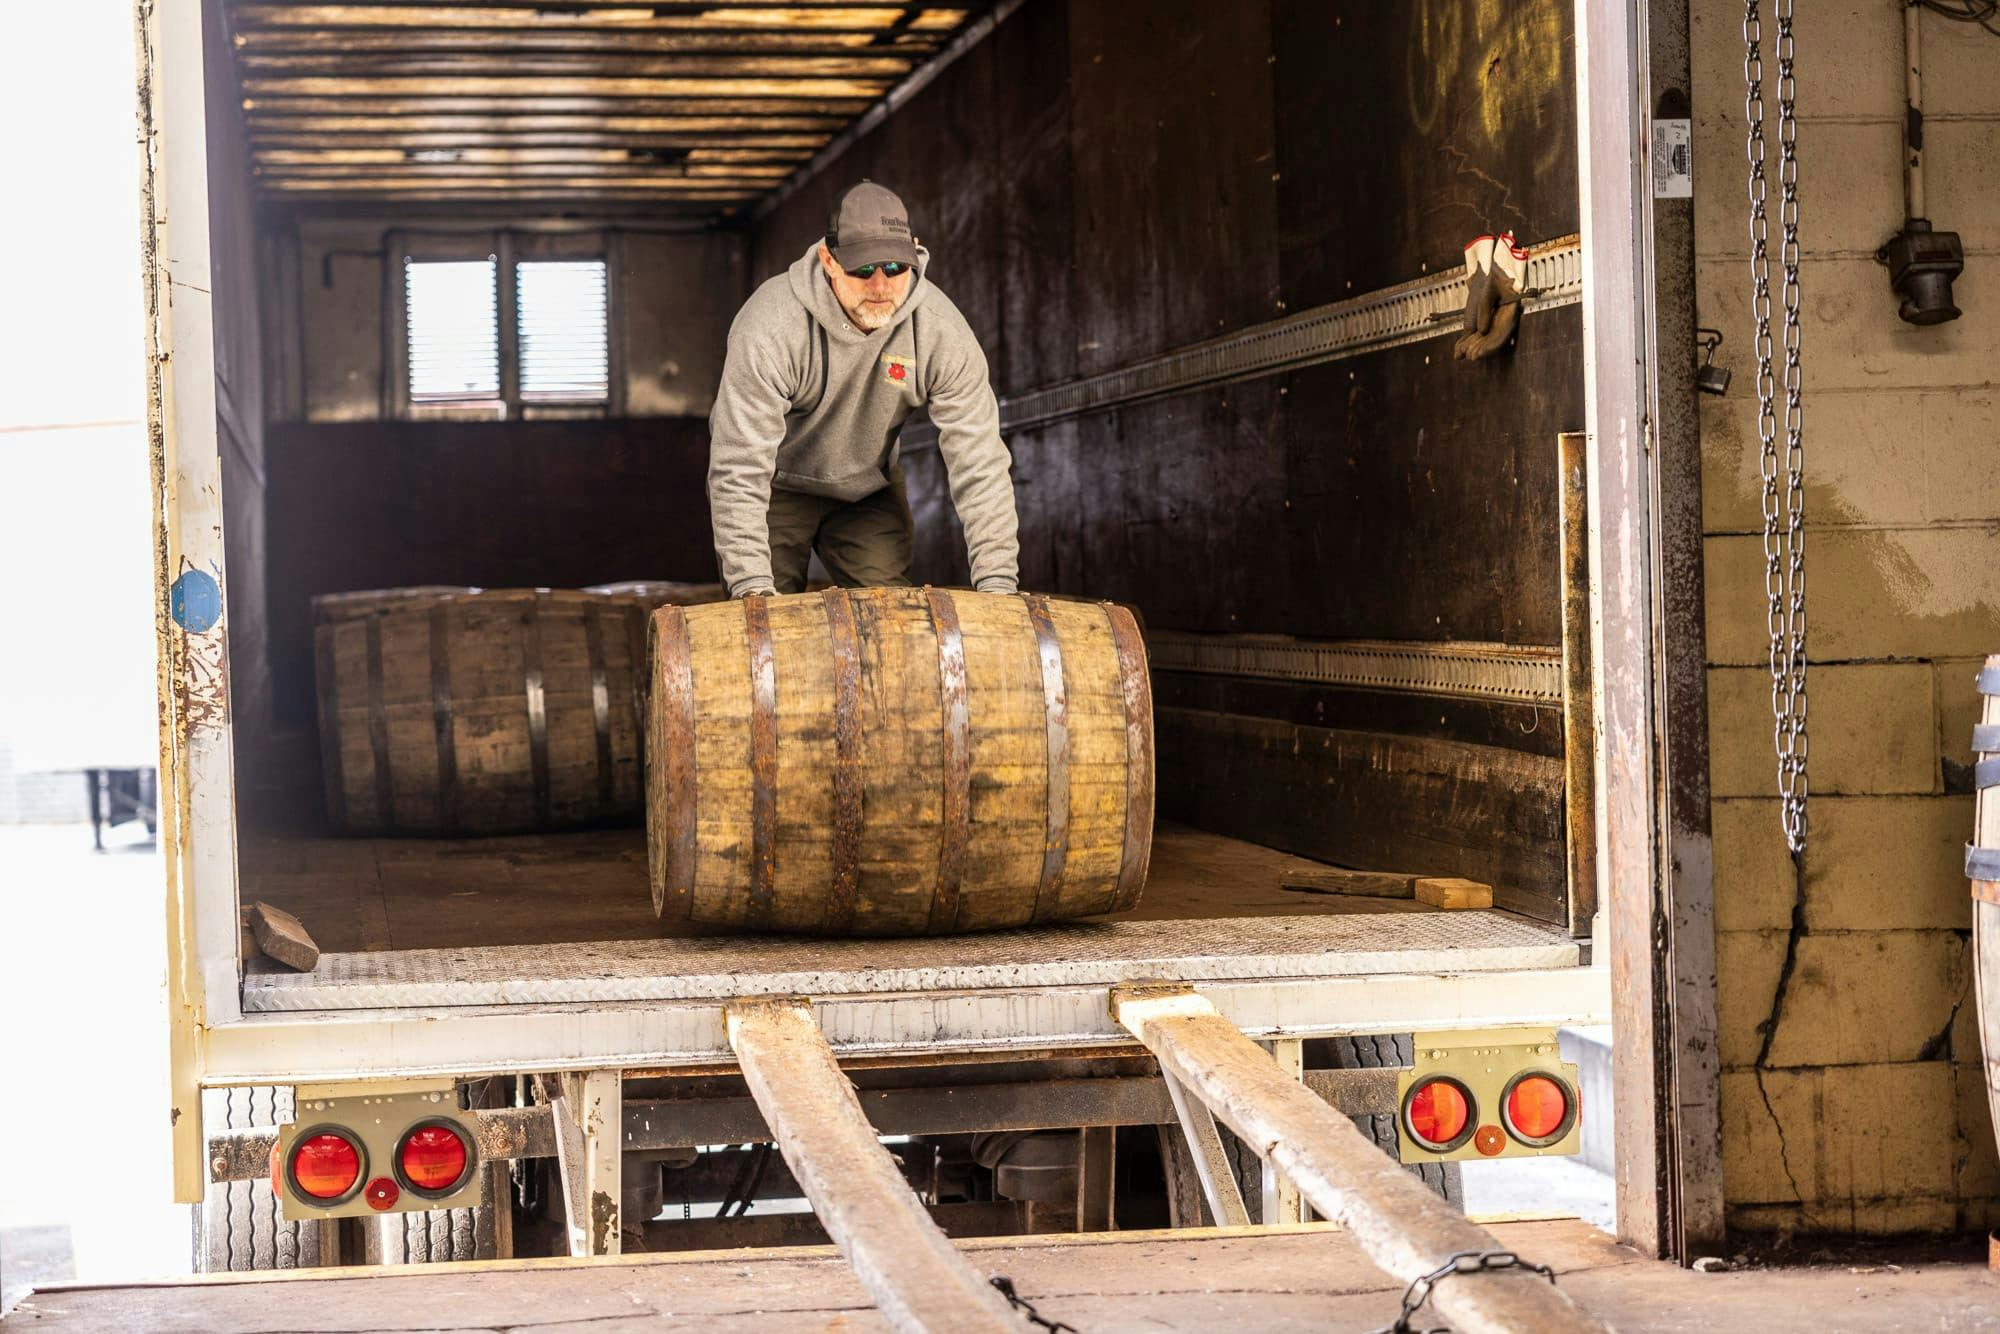 A Four Roses team member unload barrels from a truck for warehousing.